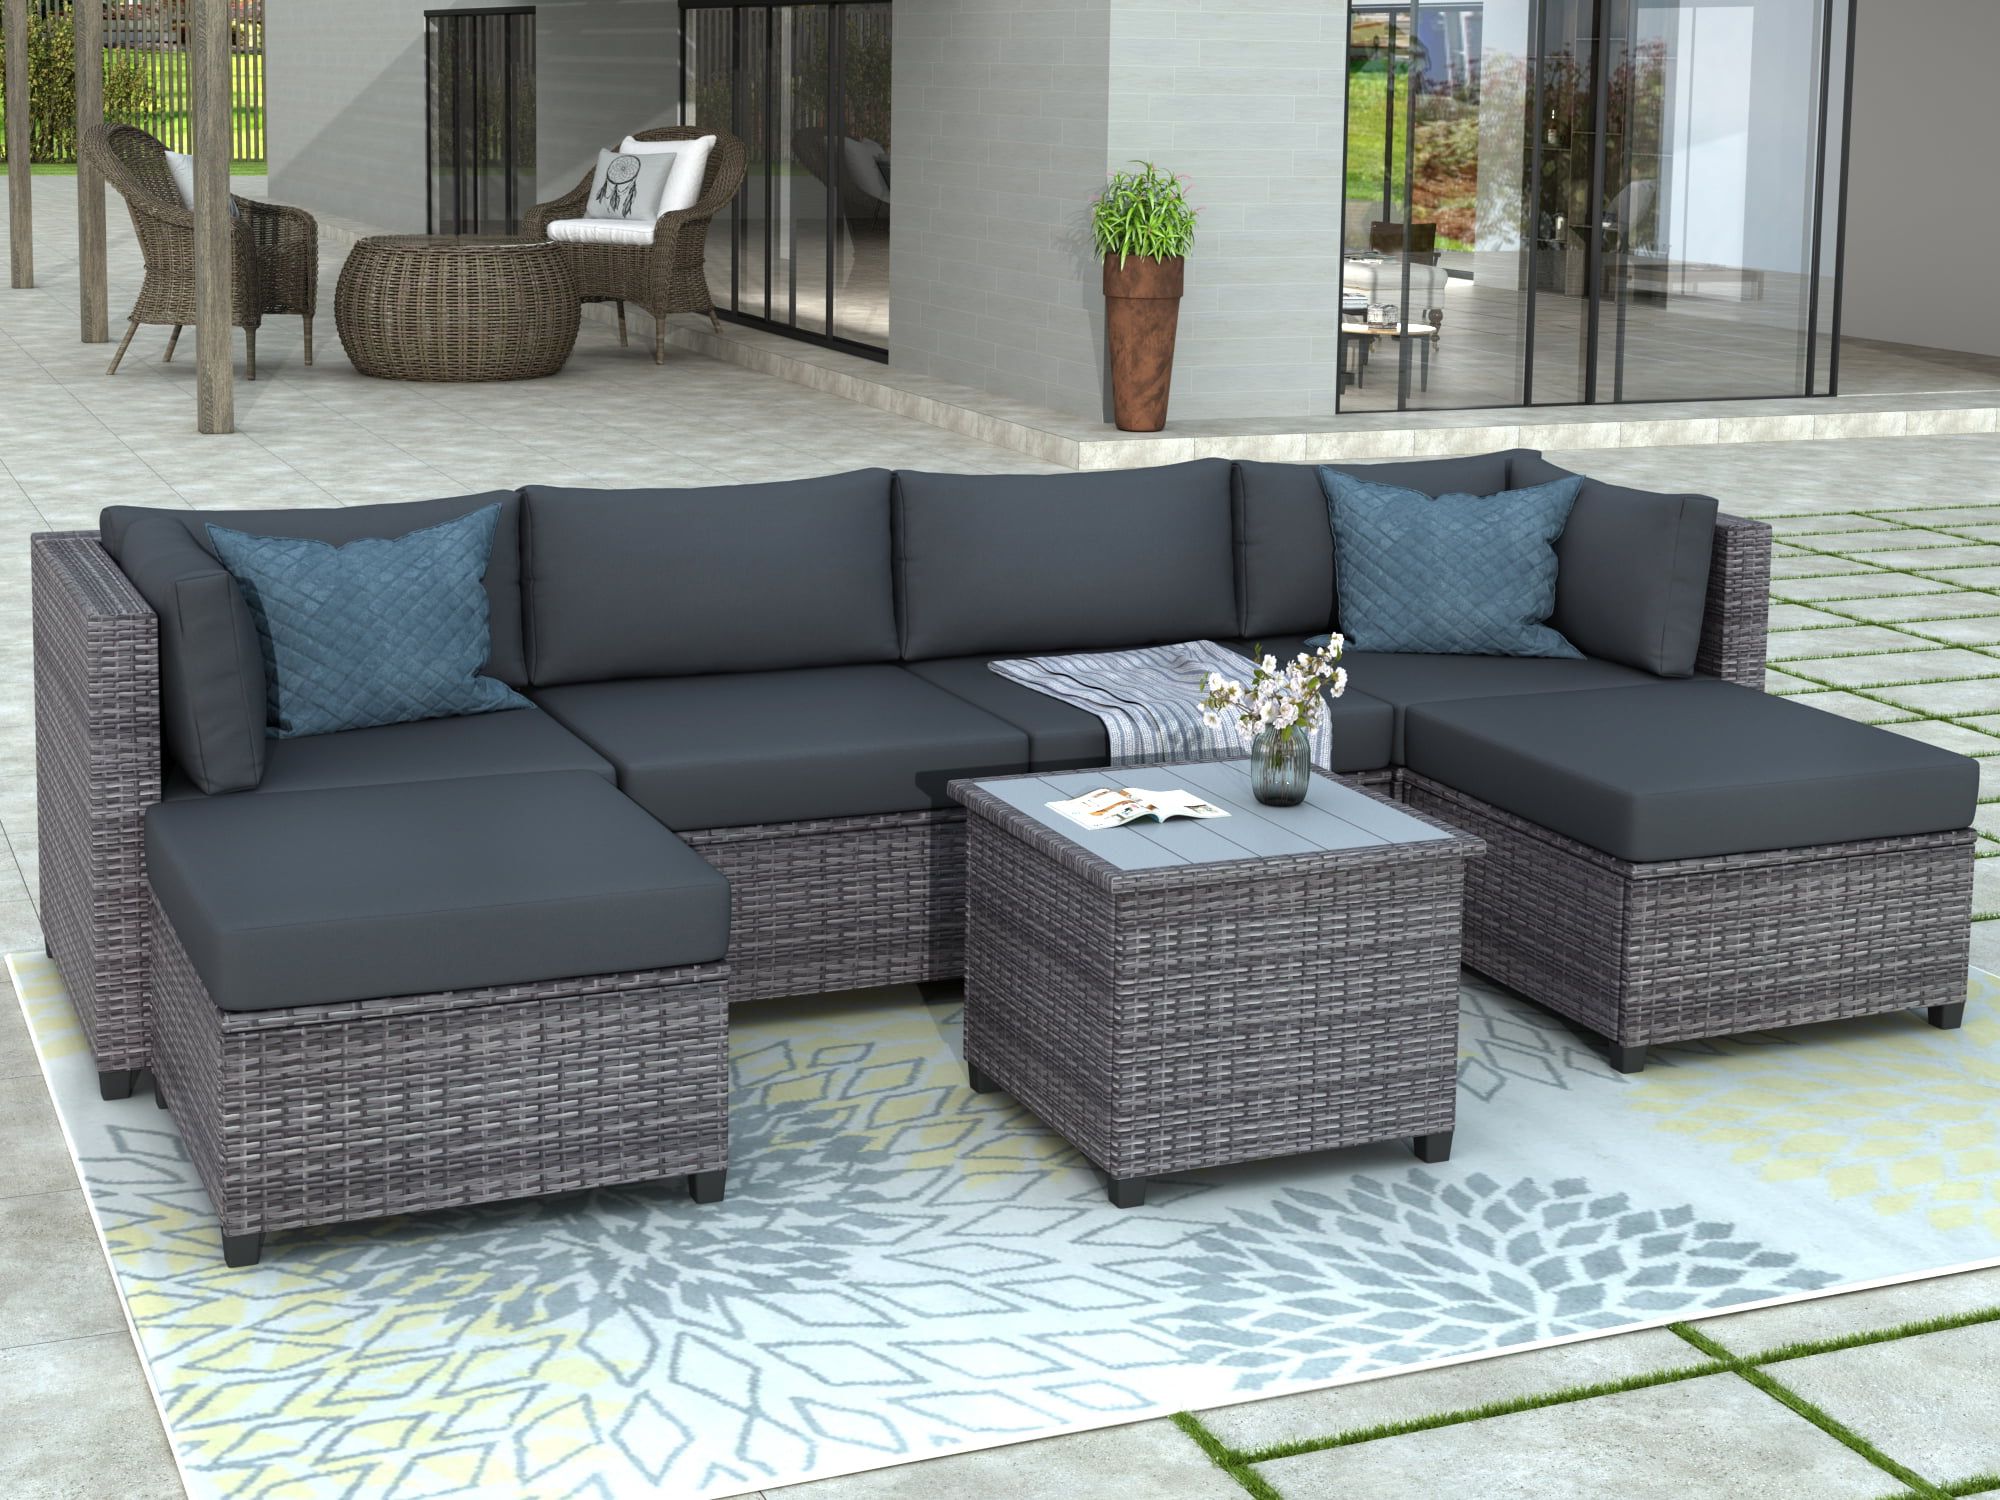 Outdoor Rattan Sectional Sofas With Coffee Table Throughout Most Popular 7 Piece Patio Sectional Sofa Set With 4 Rattan Wicker Chairs, 2 Ottoman, Coffee  Table, All Weather Outdoor Conversation Set With Gray Cushions For  Backyard, Porch, Garden, Poolside, L5018 – Walmart (Photo 2 of 15)